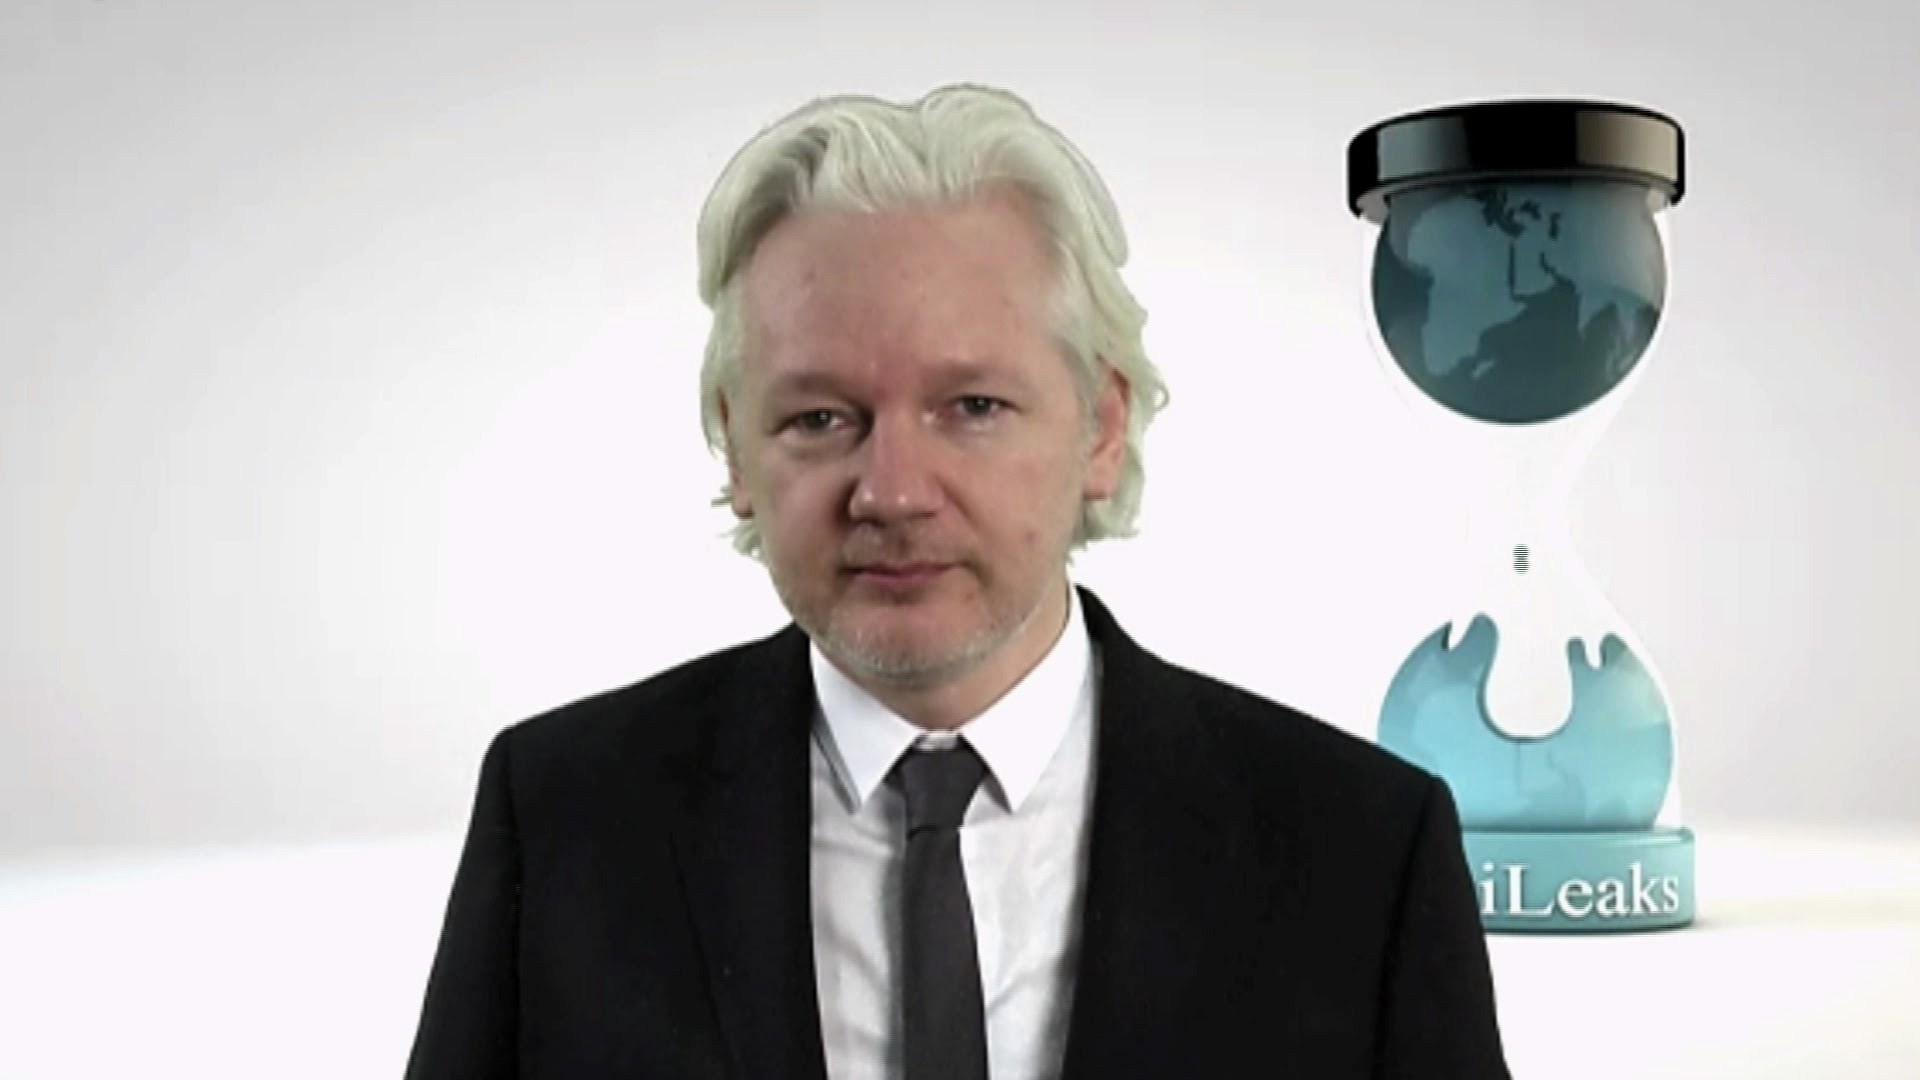 1920x1080 Julian Assange says "1,700 emails in Hillary Clinton's collection" proves  she sold weapons to ISIS in Syria [Video]